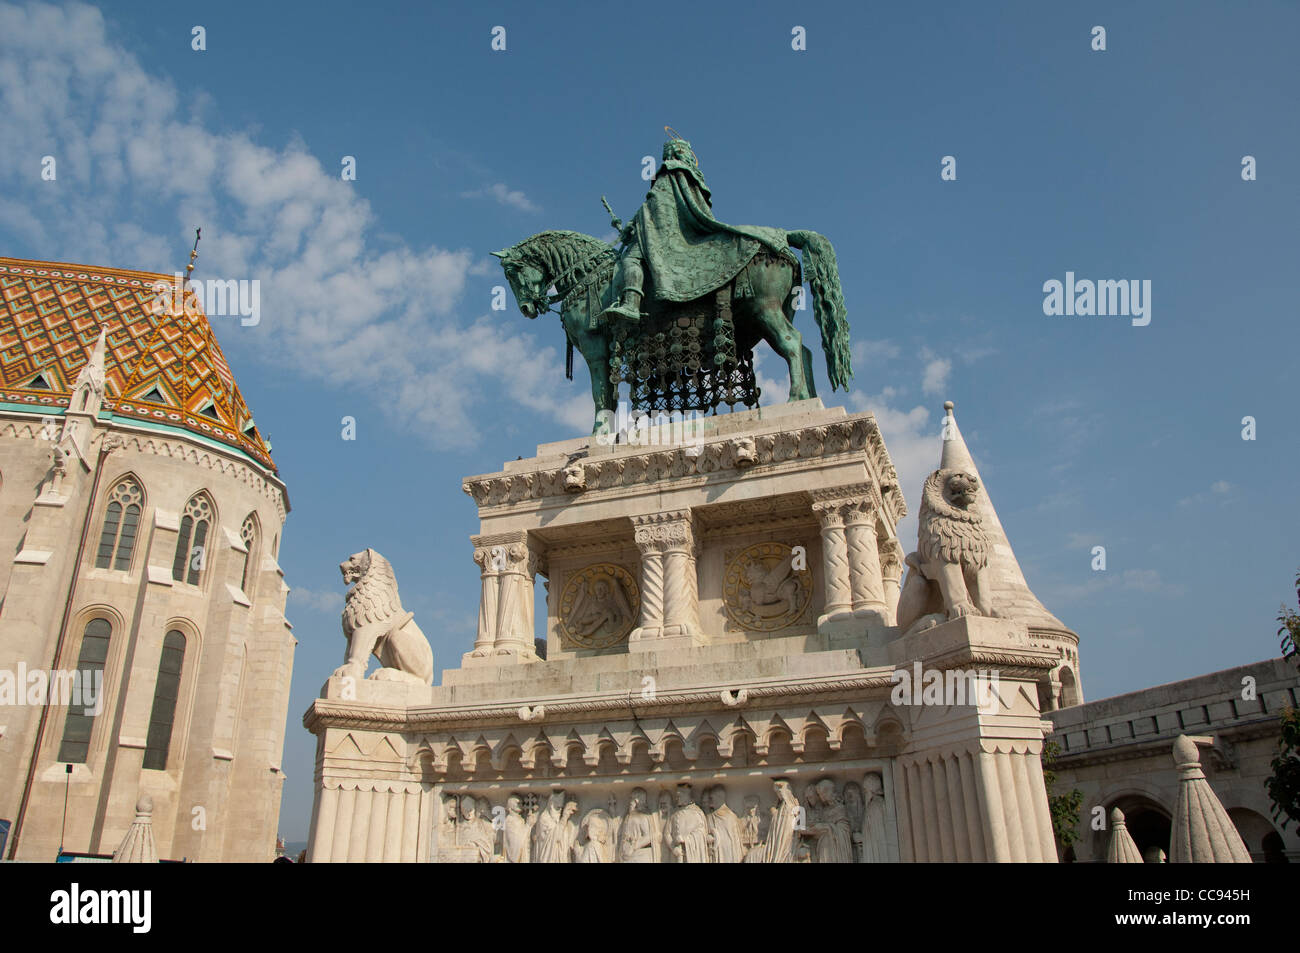 Hungary, Budapest, Castle Hill, Fisherman's Bastion. Statue of King Stephen in front of St. Matthias church. Stock Photo